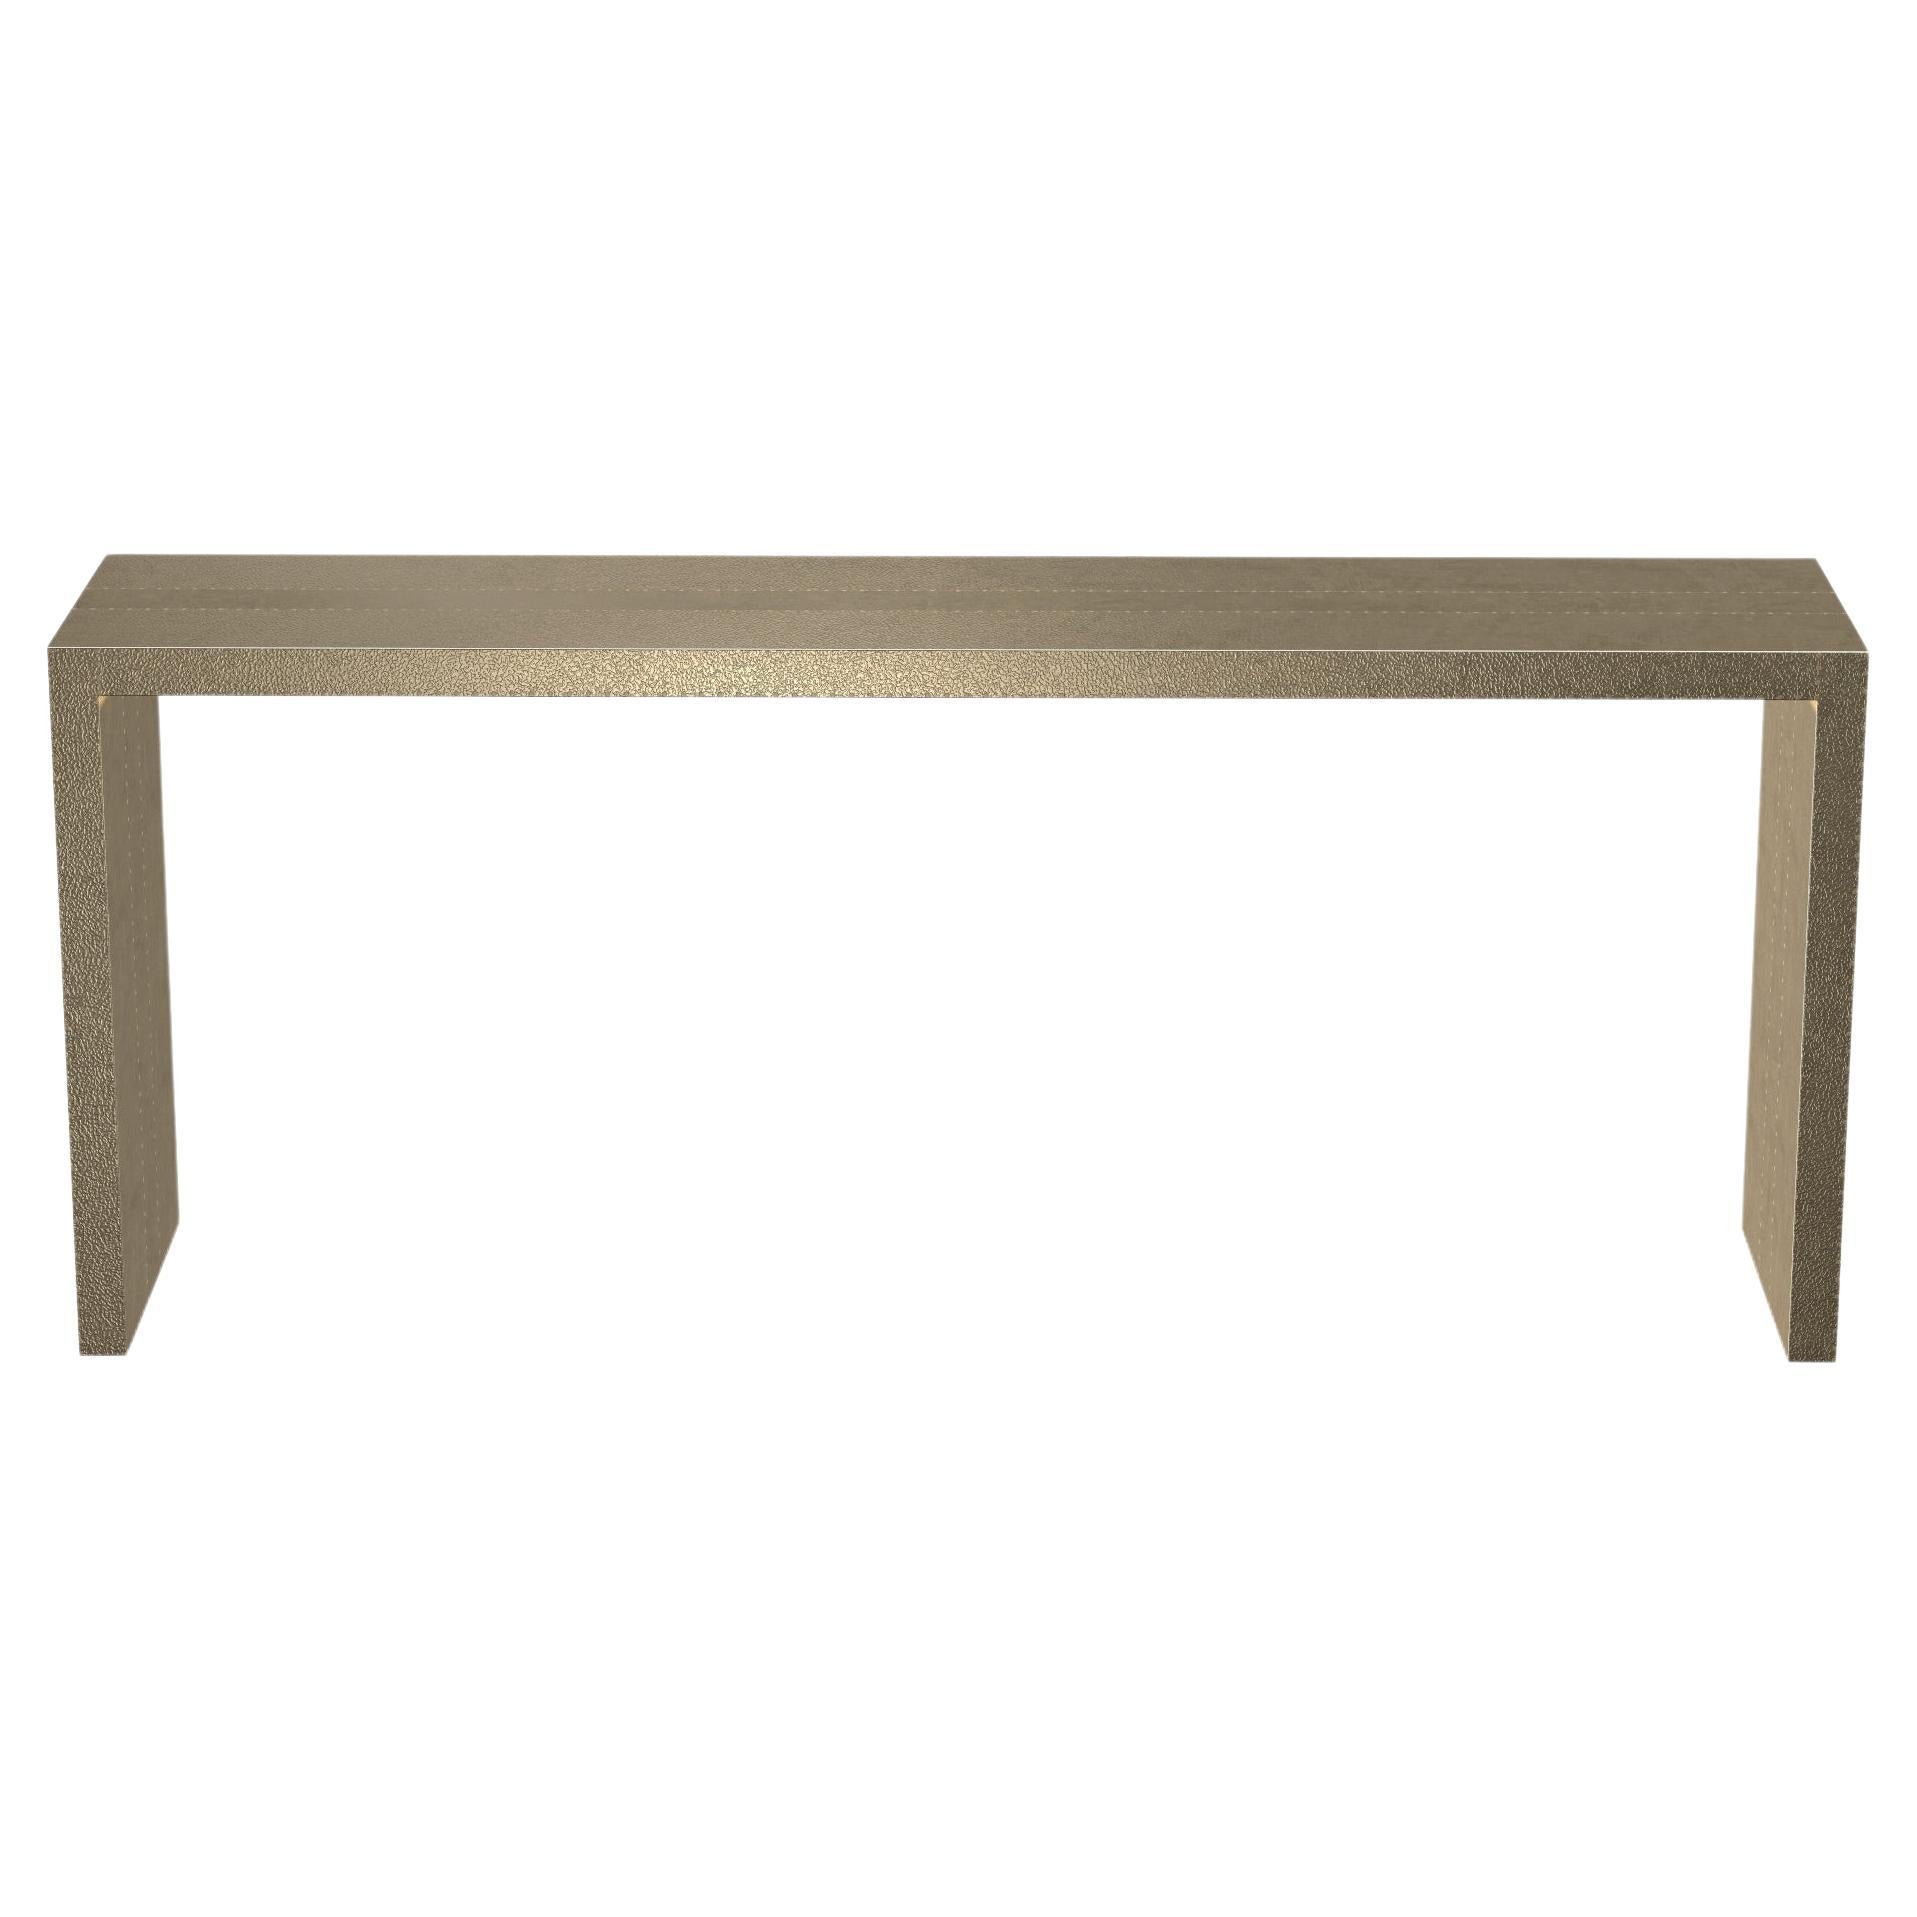 Art Nouveau Tray Console Tables in Fine Hammered Brass by Alison Spear For Sale